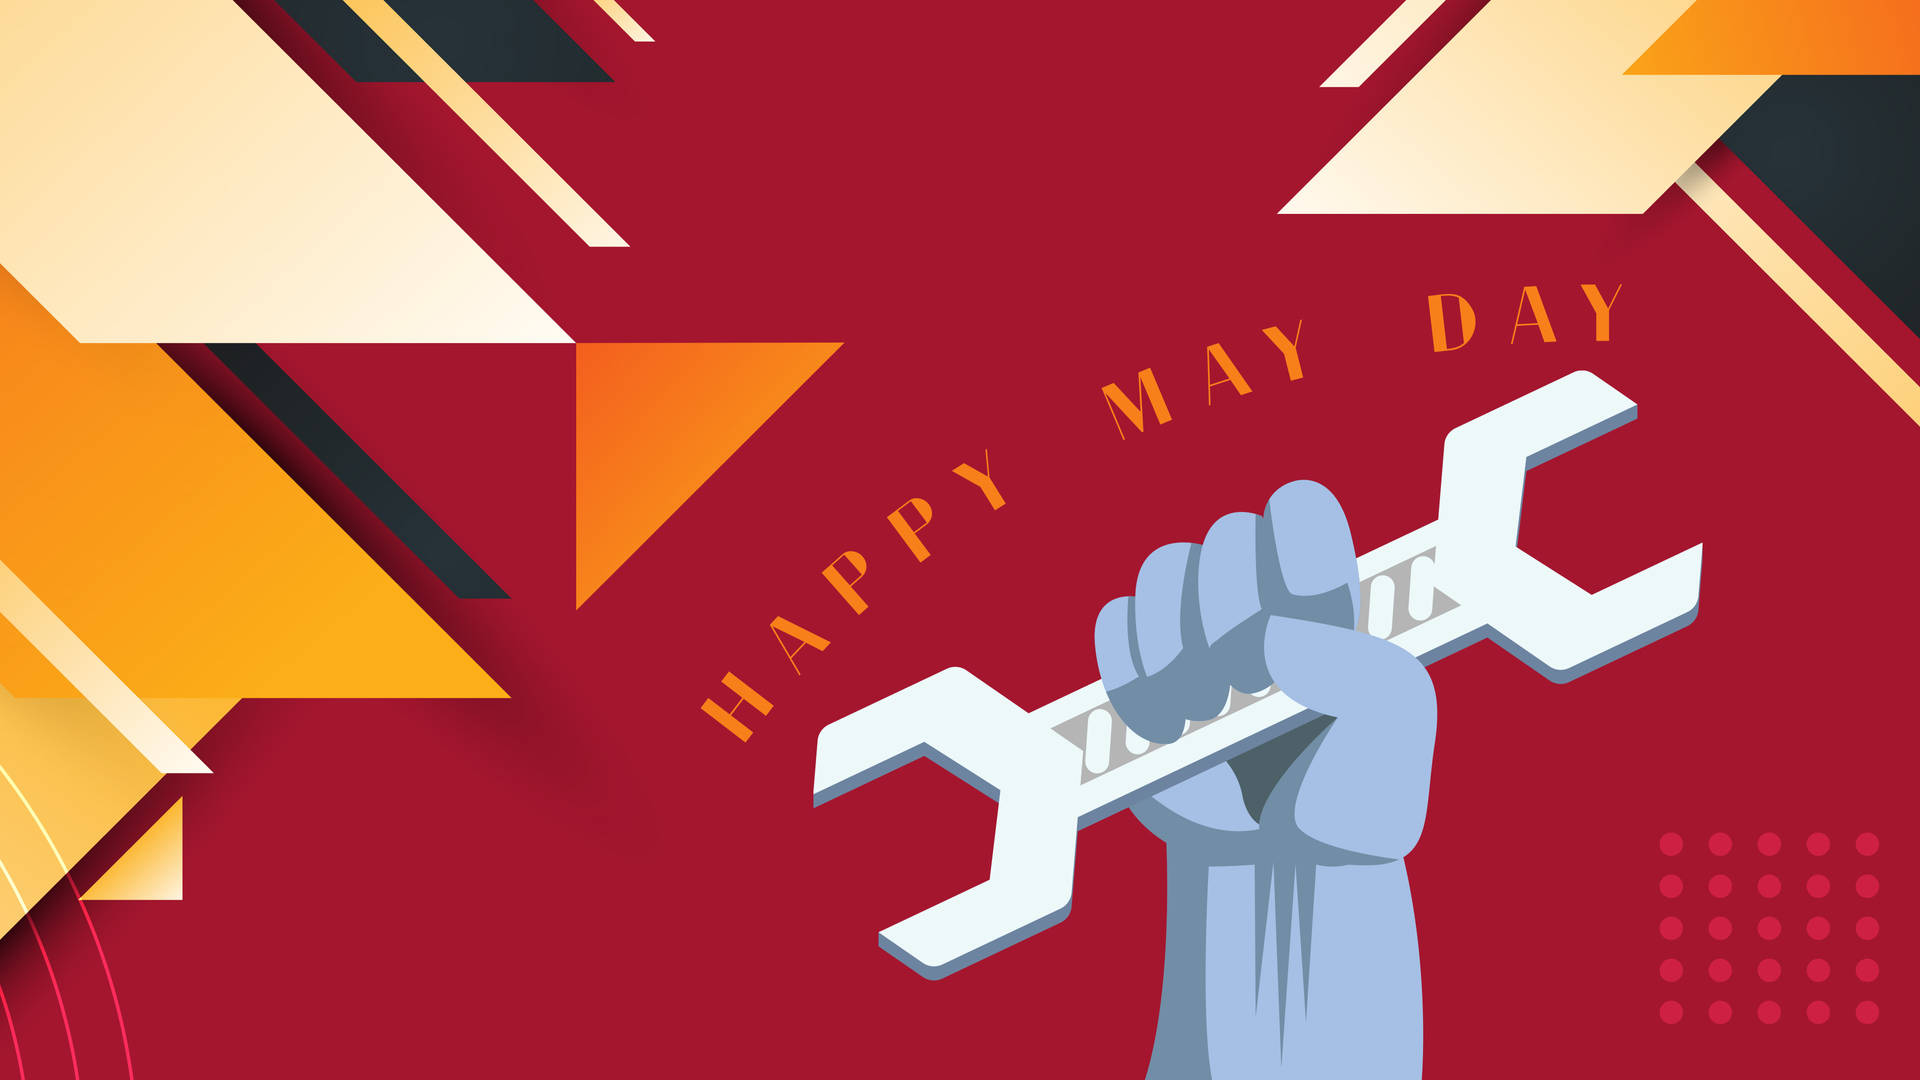 May Day Abstract Design Background